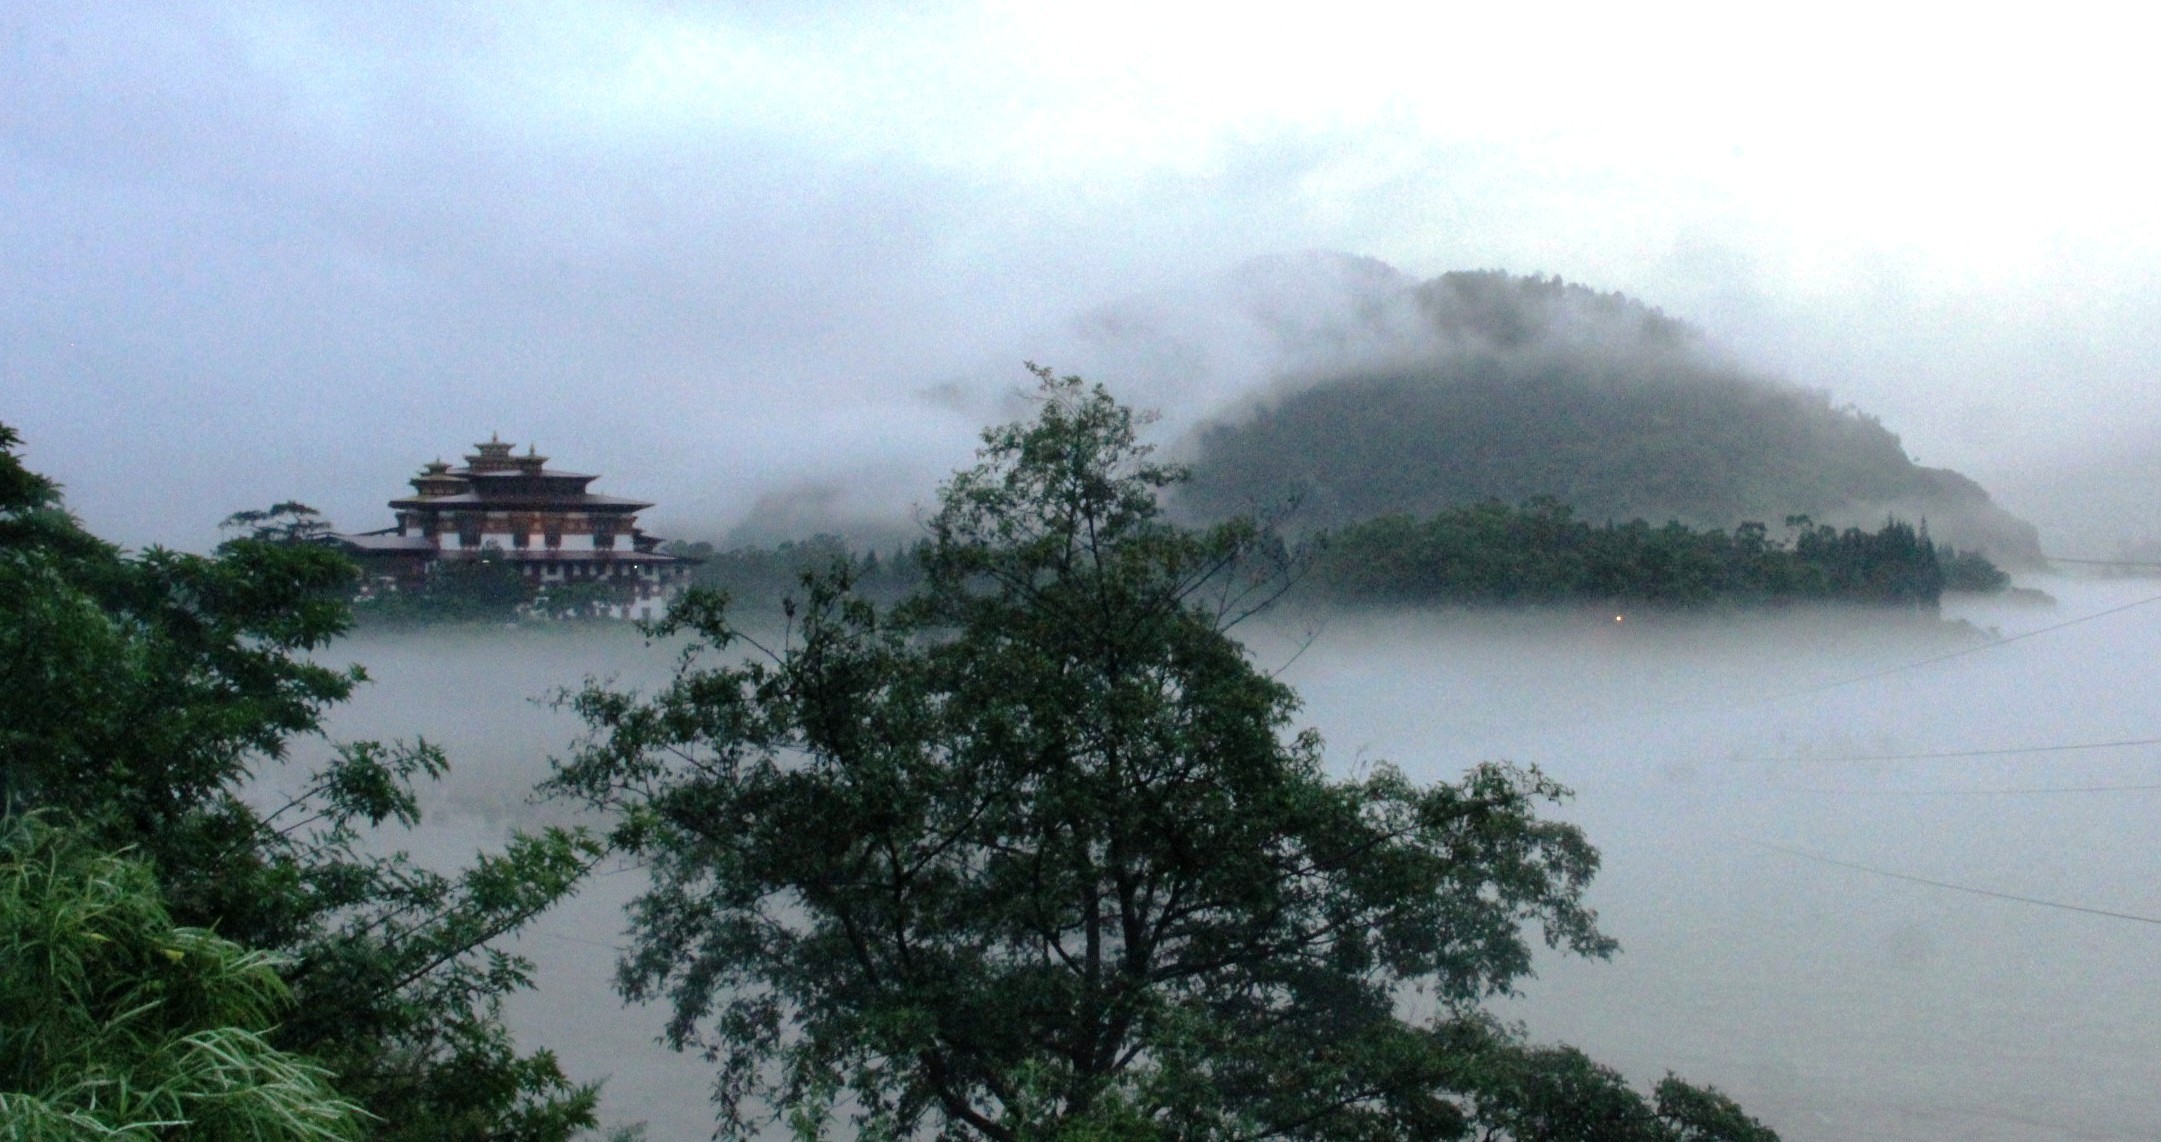 Located on a stretch of land where the Pho chhu and Mo chhu converge, the Punakha dzong served as the centre of government and the first session of the National Assembly was also held here in 1953.  Punakha was the first capital of Bhutan and the country’s first king was crowned here in 1907.